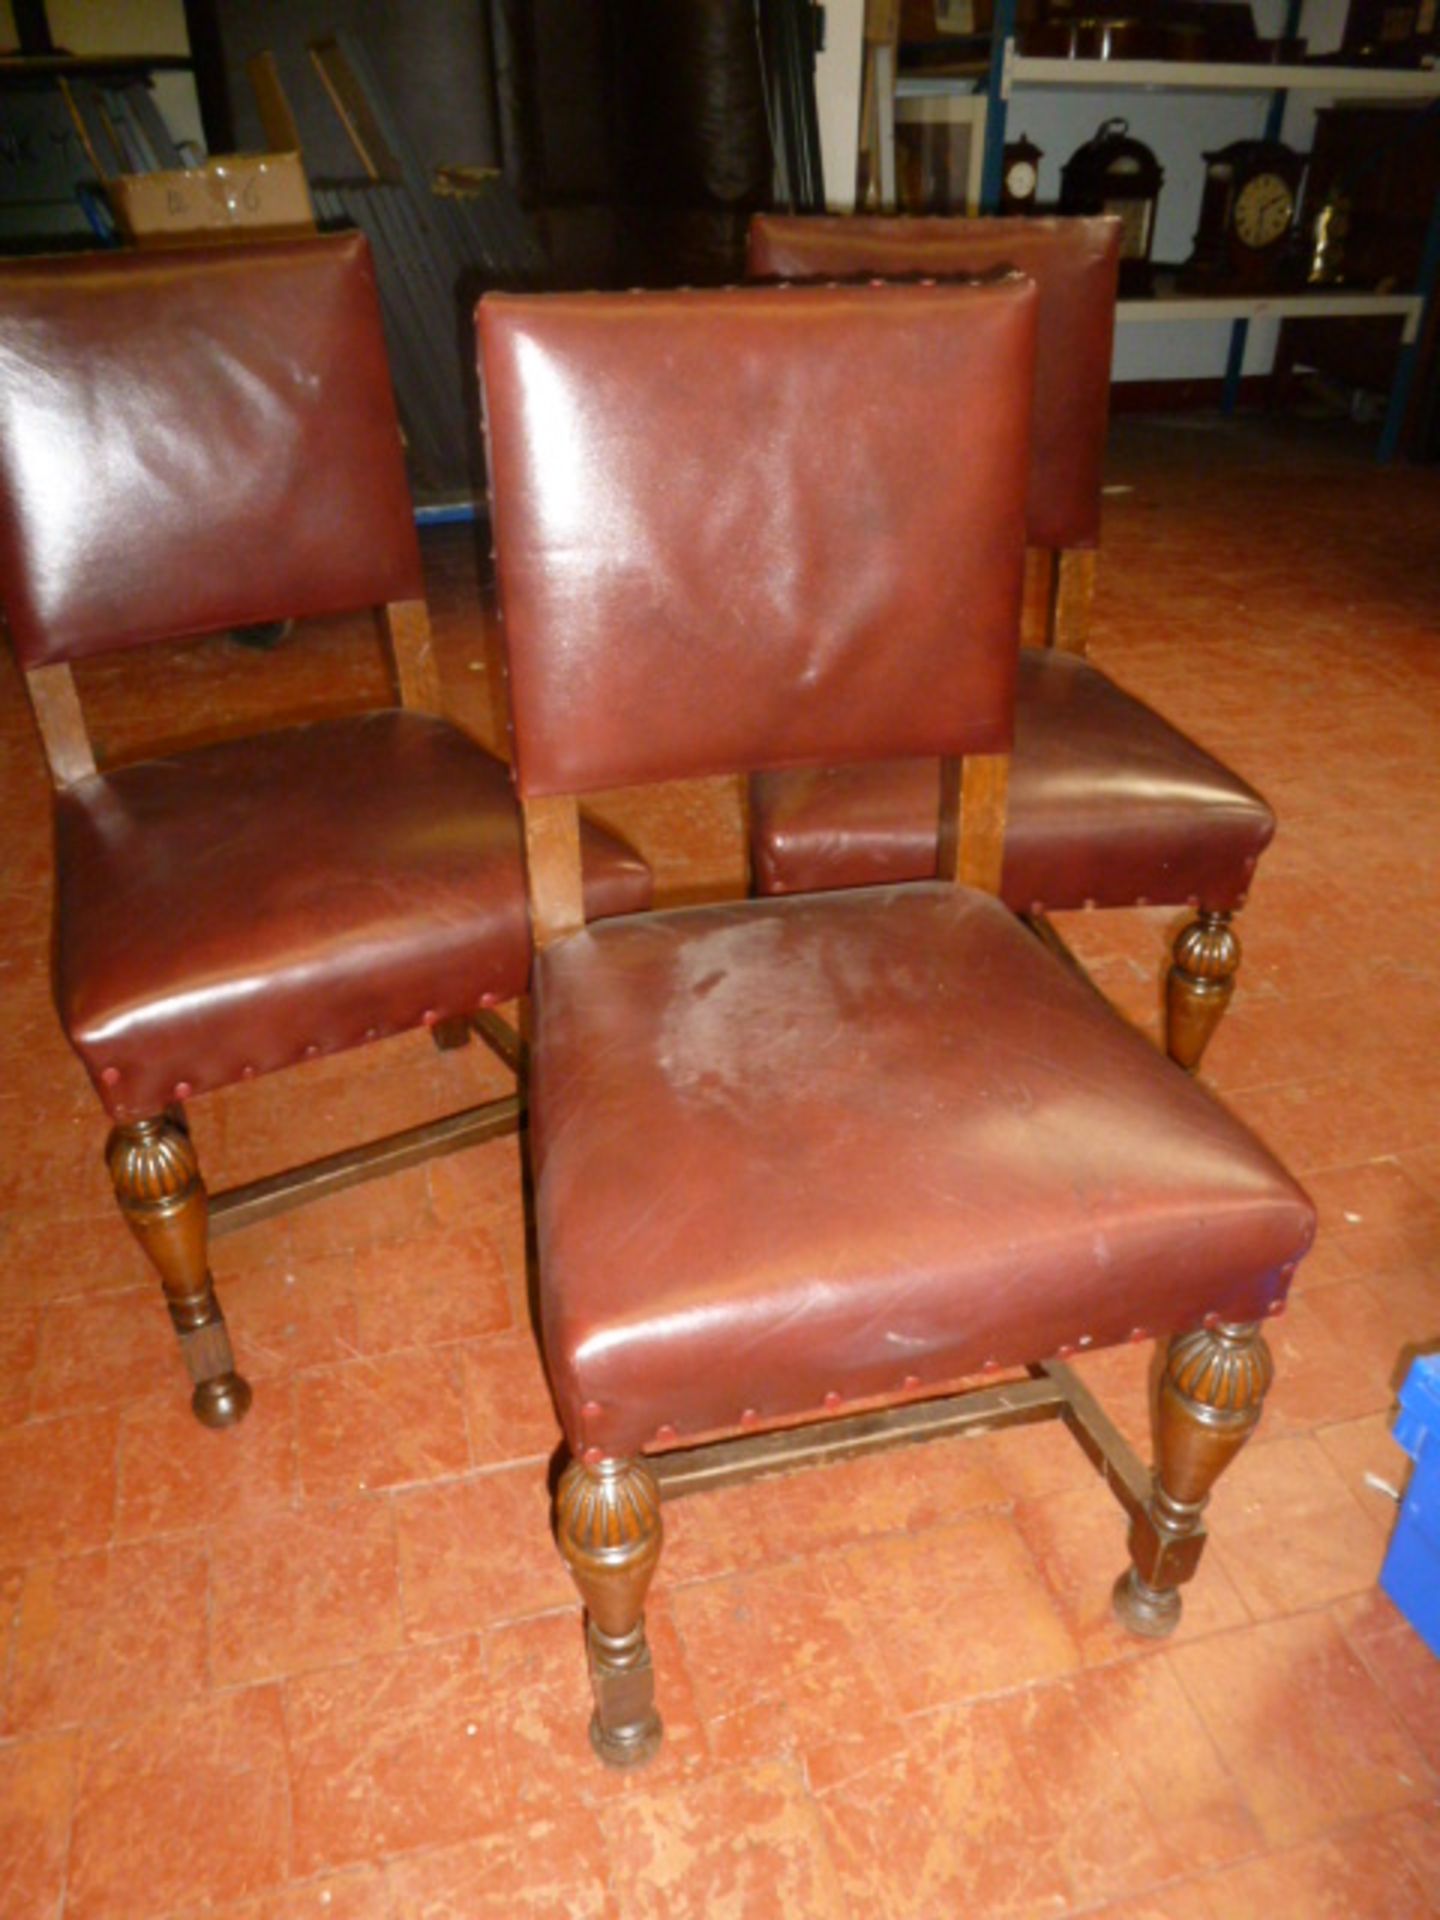 3 x Matching Early Wood Chairs with Dark Red Leather & Stud Detail.